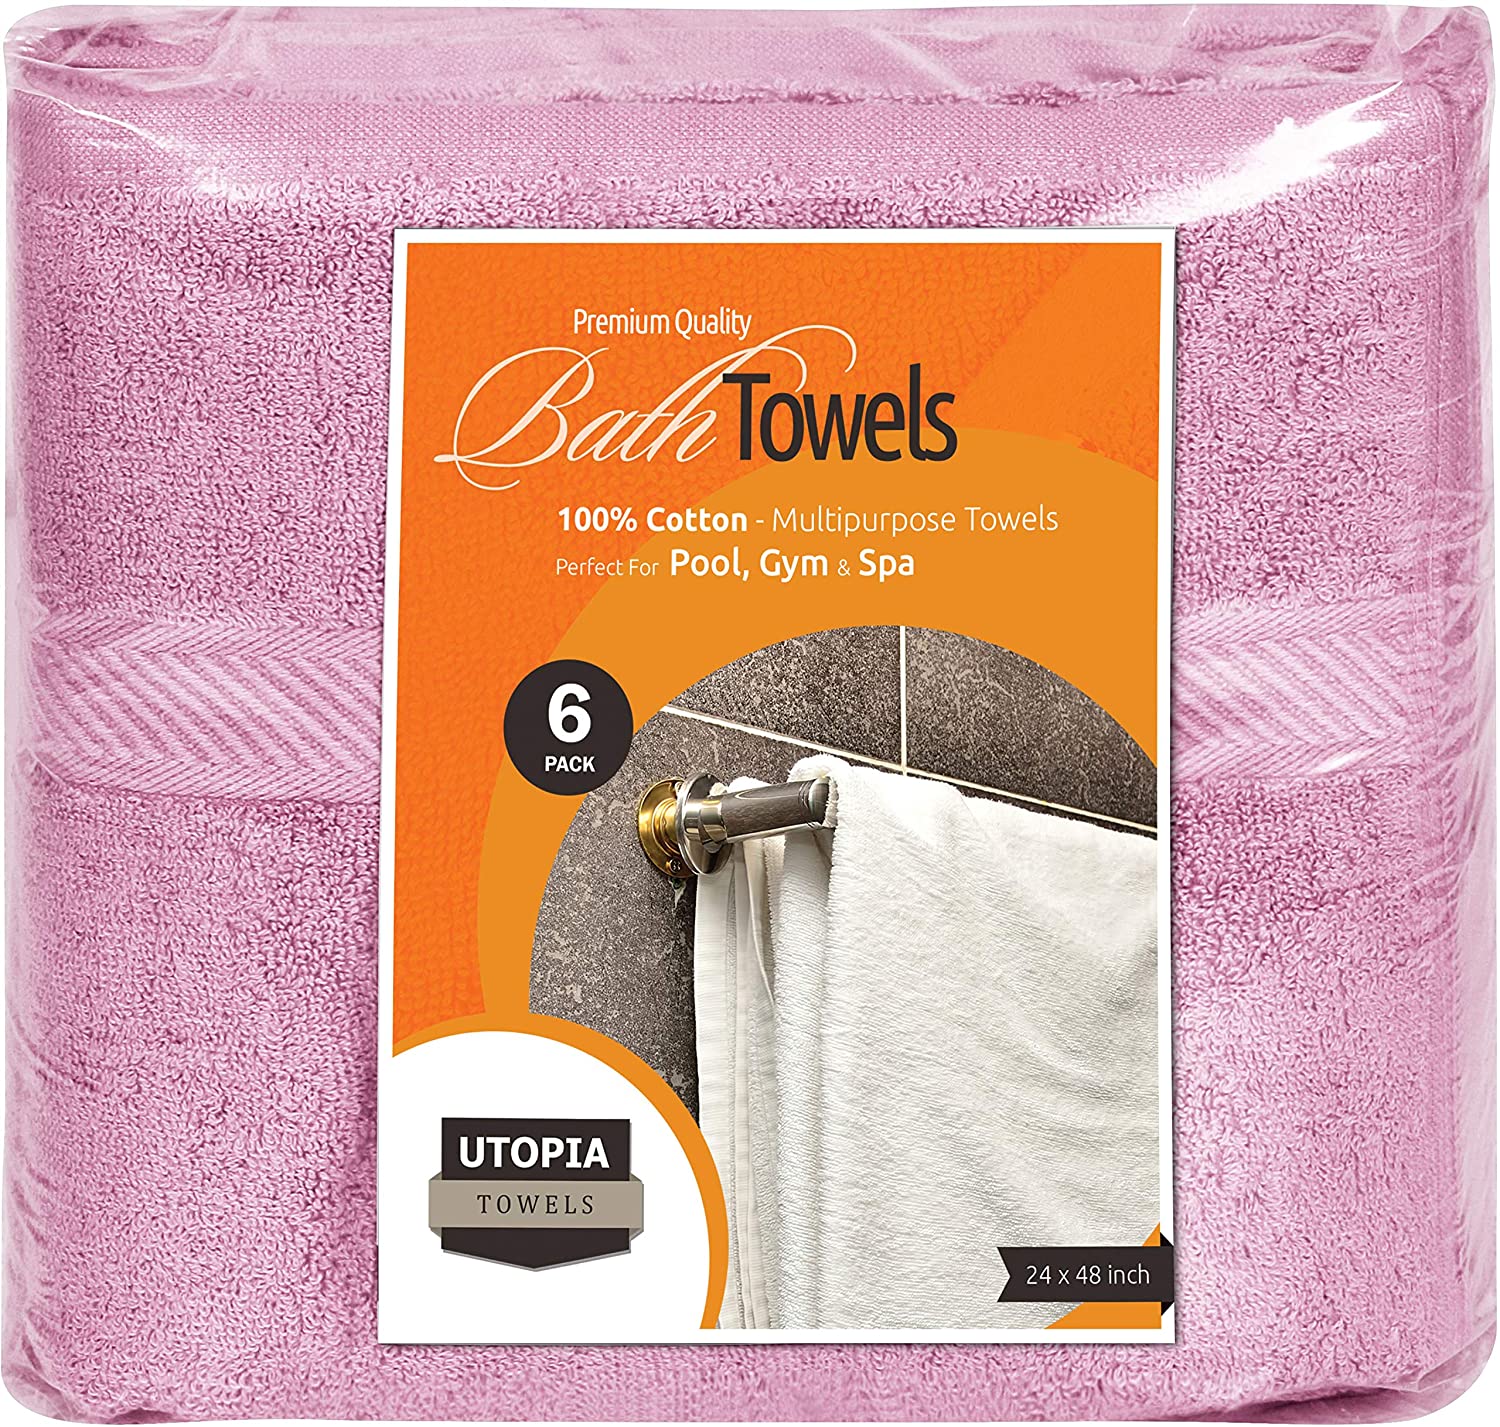 Utopia Towels Cotton Bath Towels - 24x48, White, Pack of 6 for